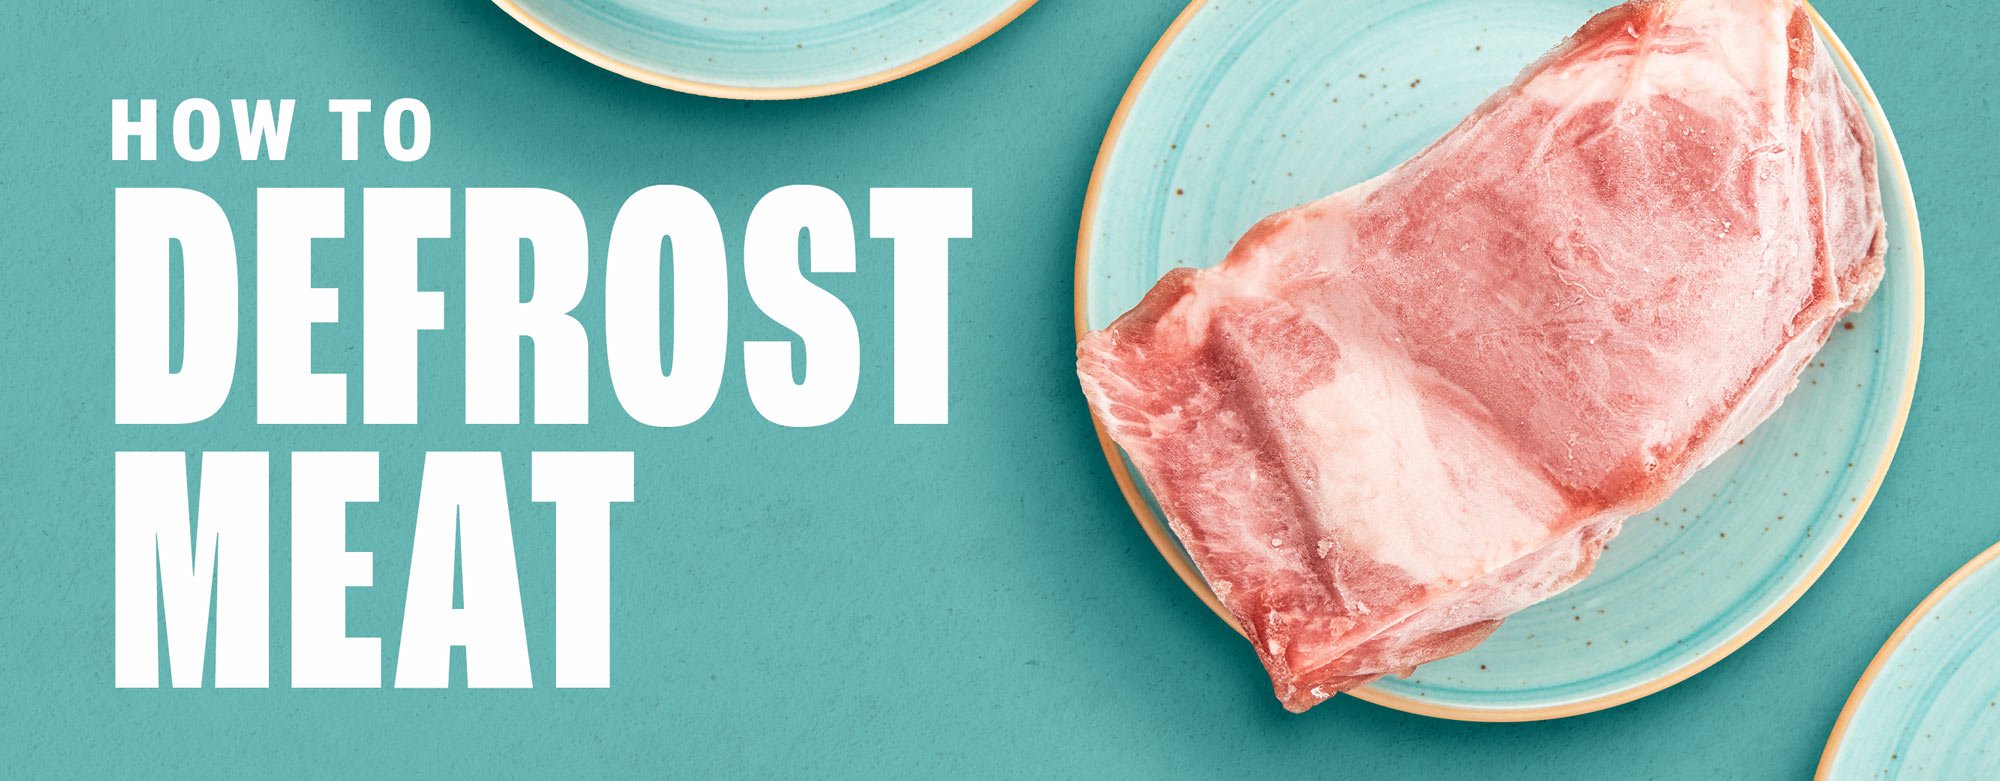 How to Defrost Meat 